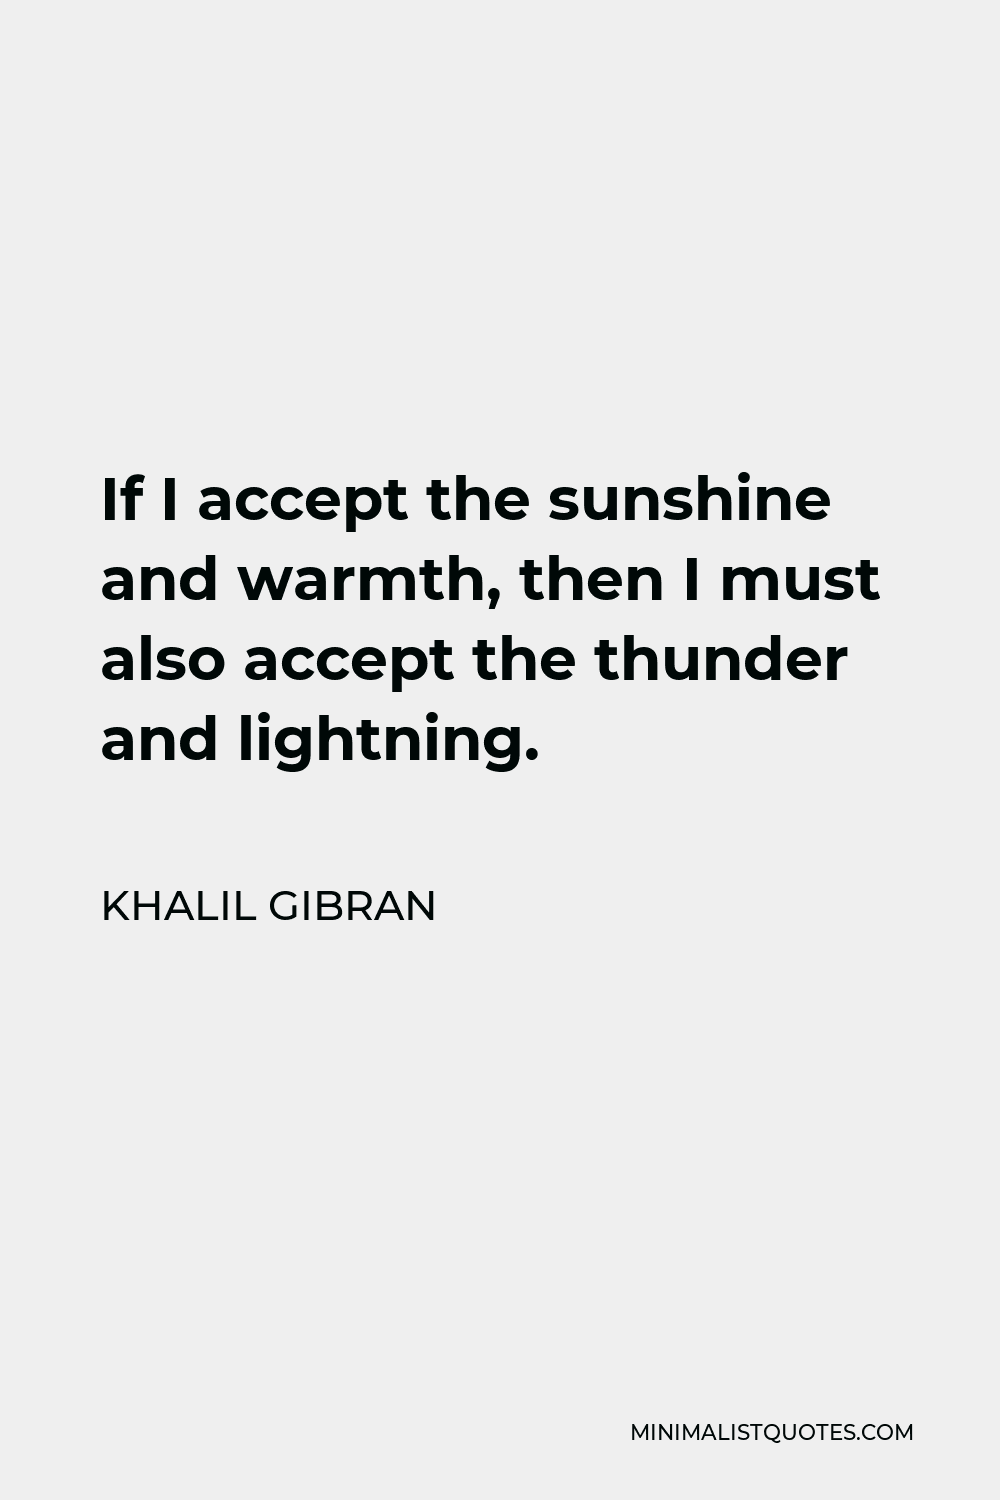 Khalil Gibran Quote - If I accept the sunshine and warmth, then I must also accept the thunder and lightning.